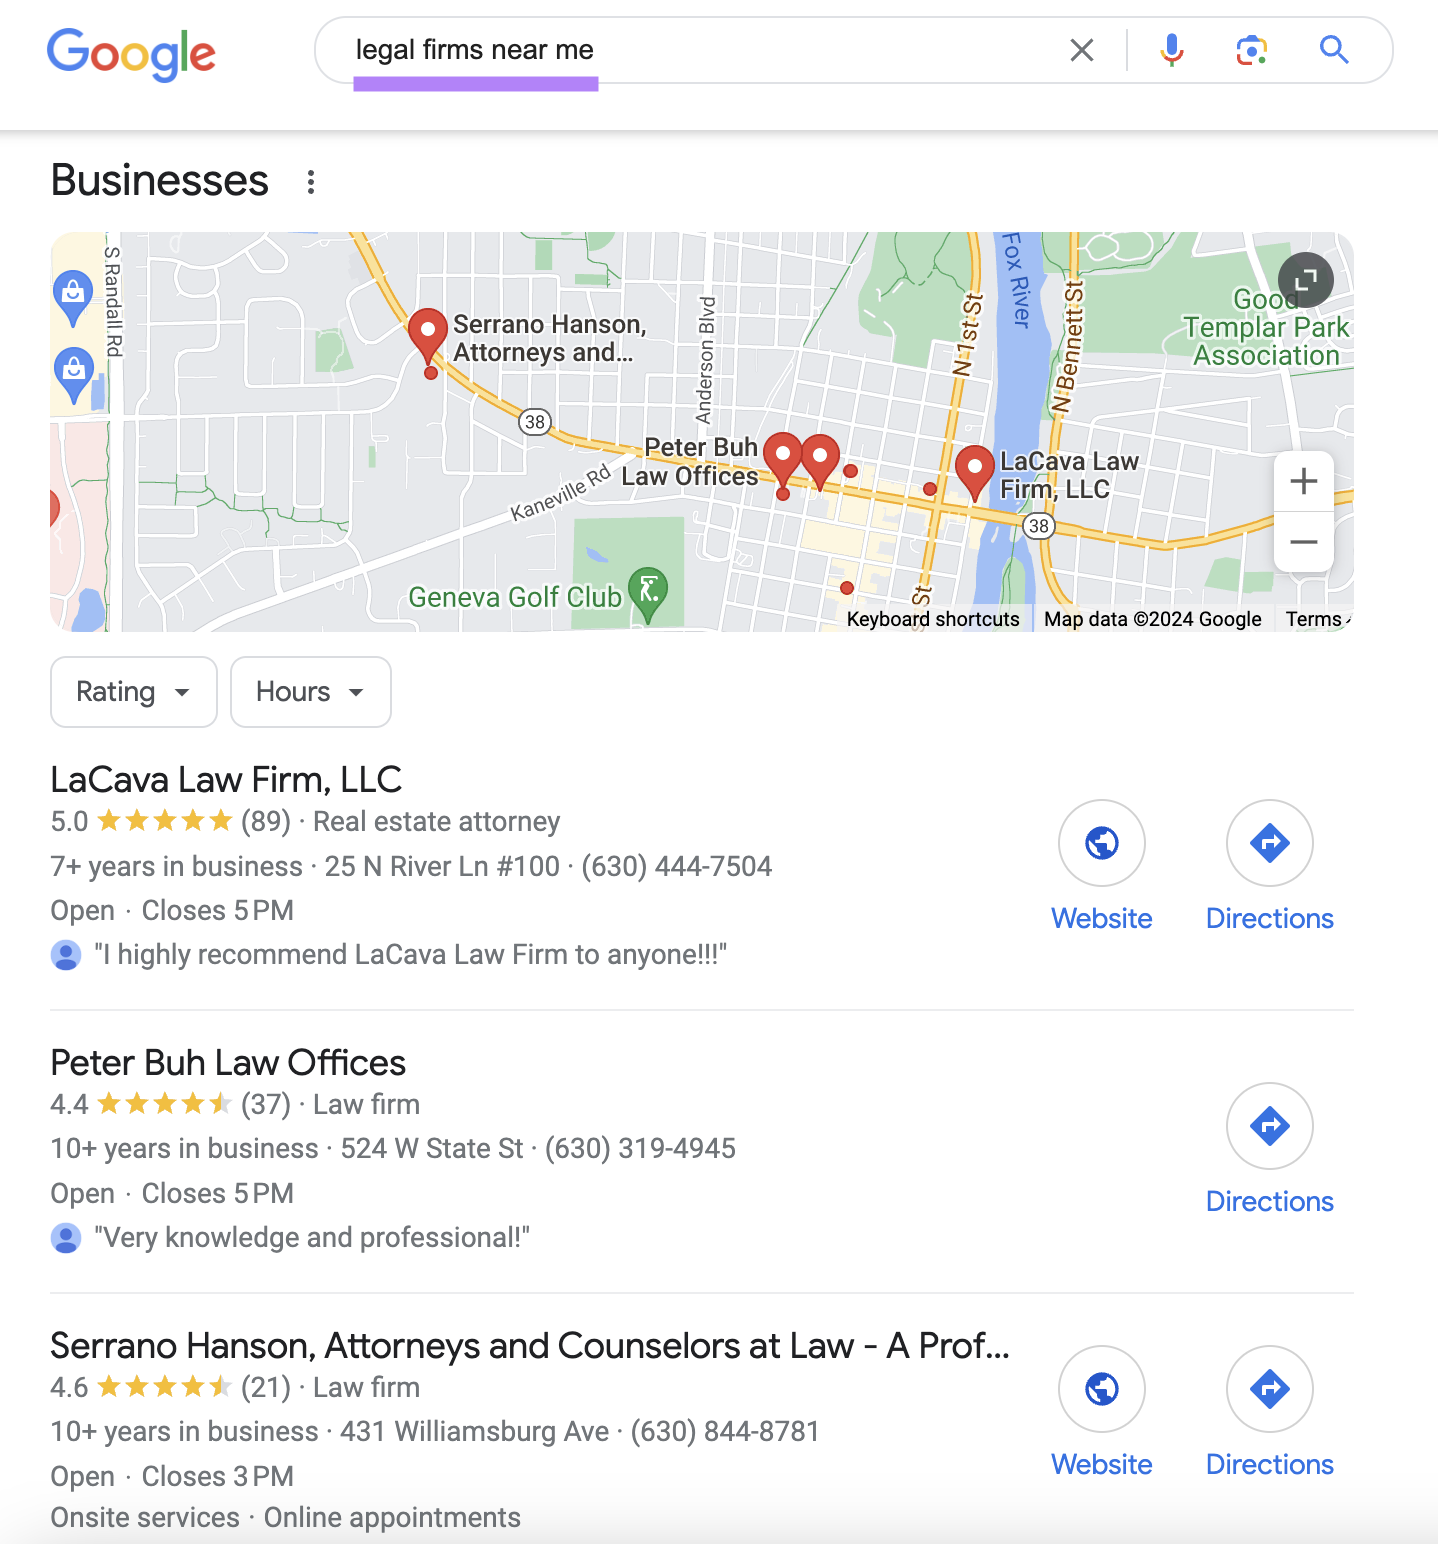 Google's local pack results for "legal firms near me" query